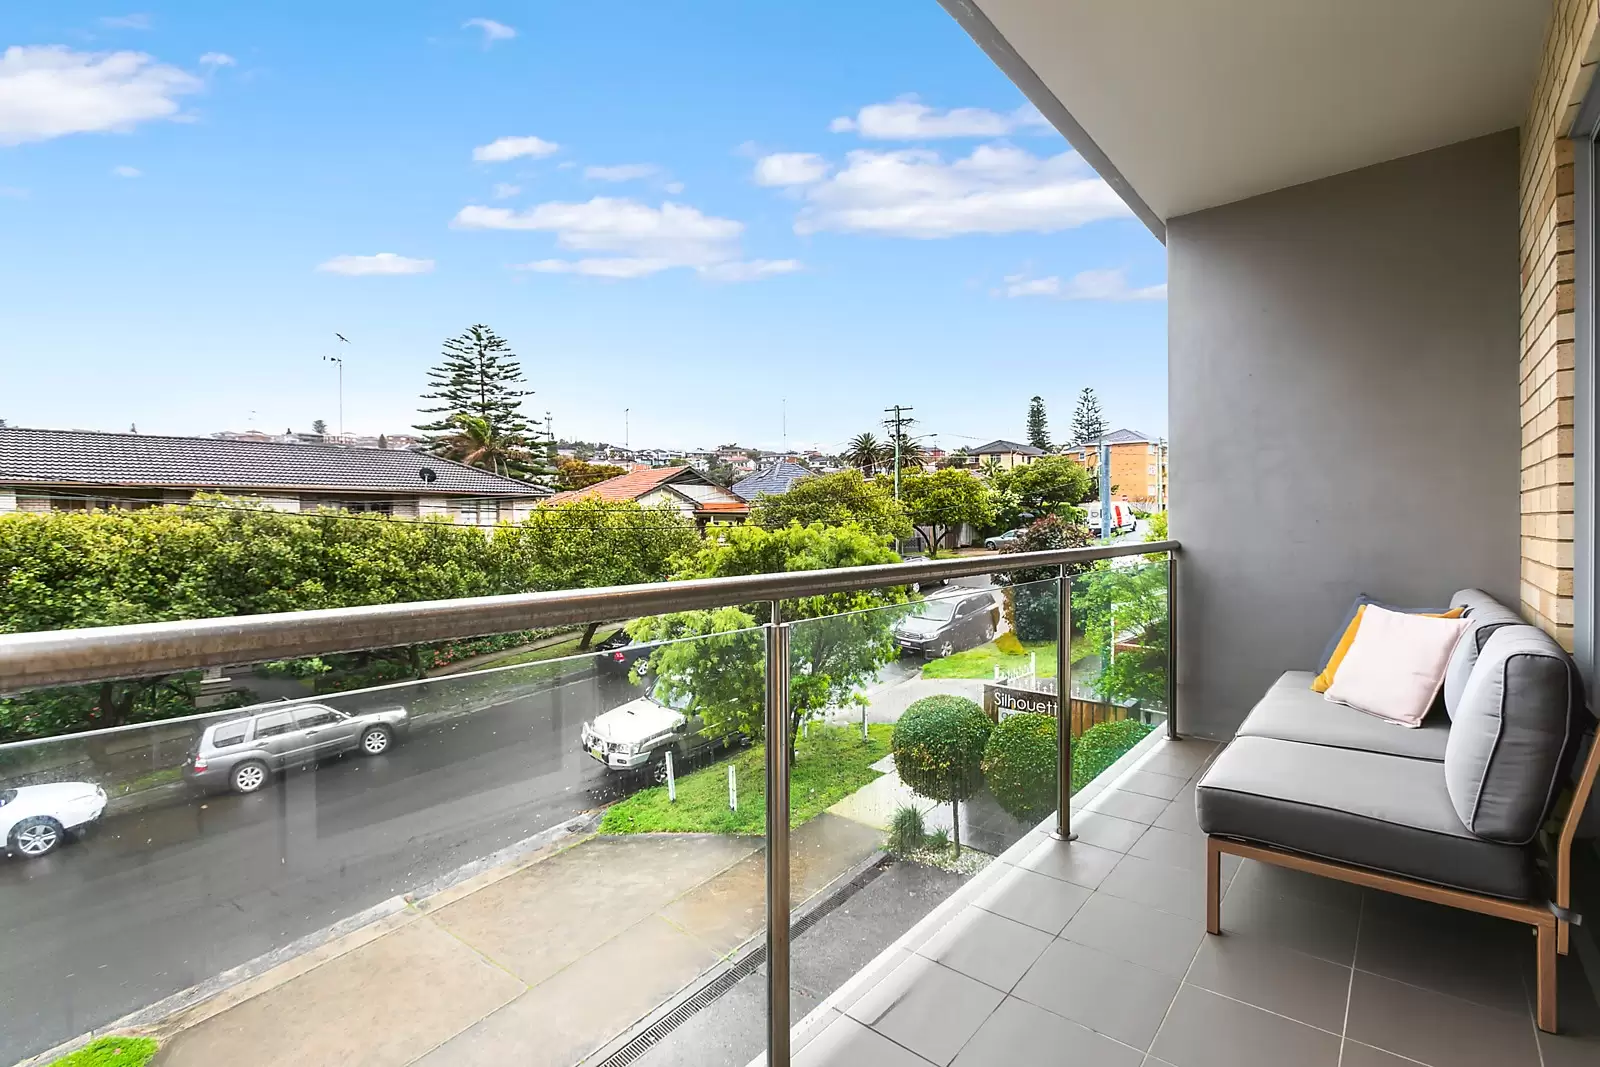 Photo #4: 2/79-81 Duncan Street, Maroubra - Sold by Sydney Sotheby's International Realty